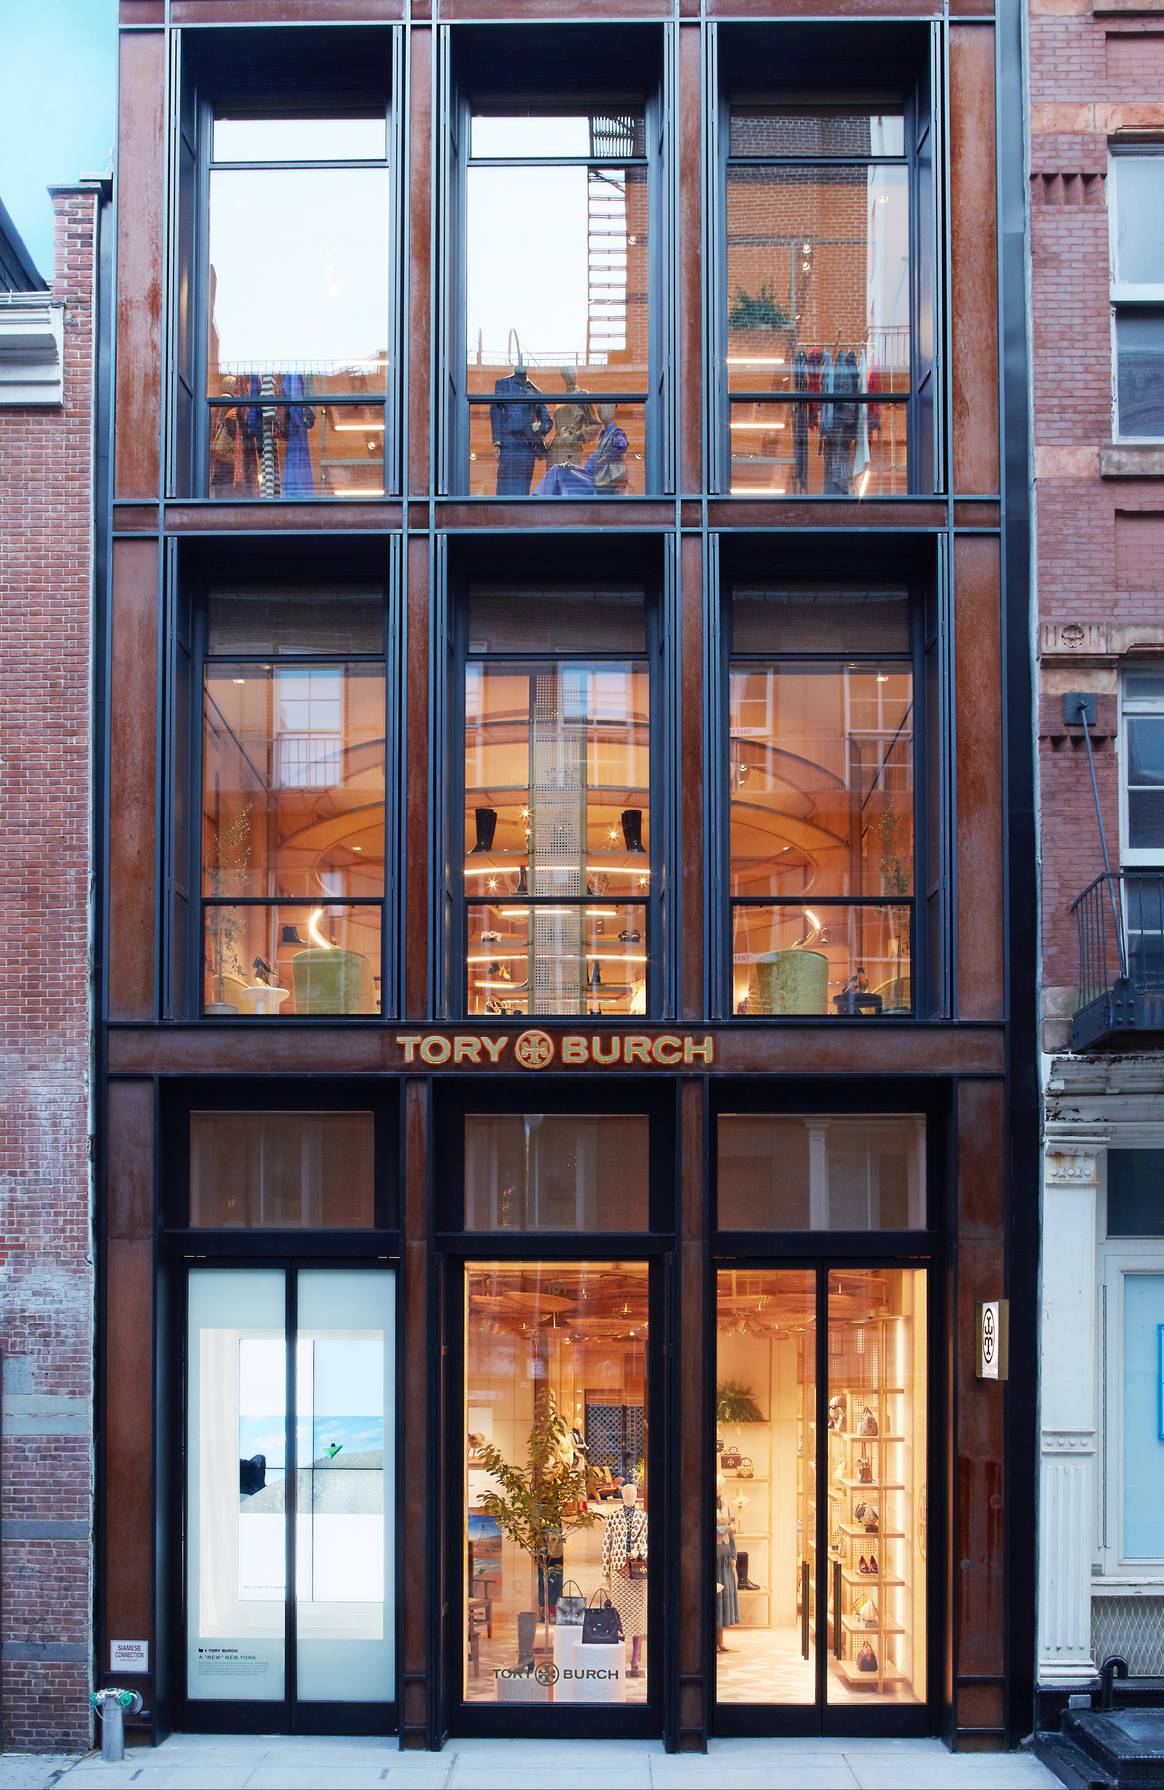 Image: courtesy of Tory Burch